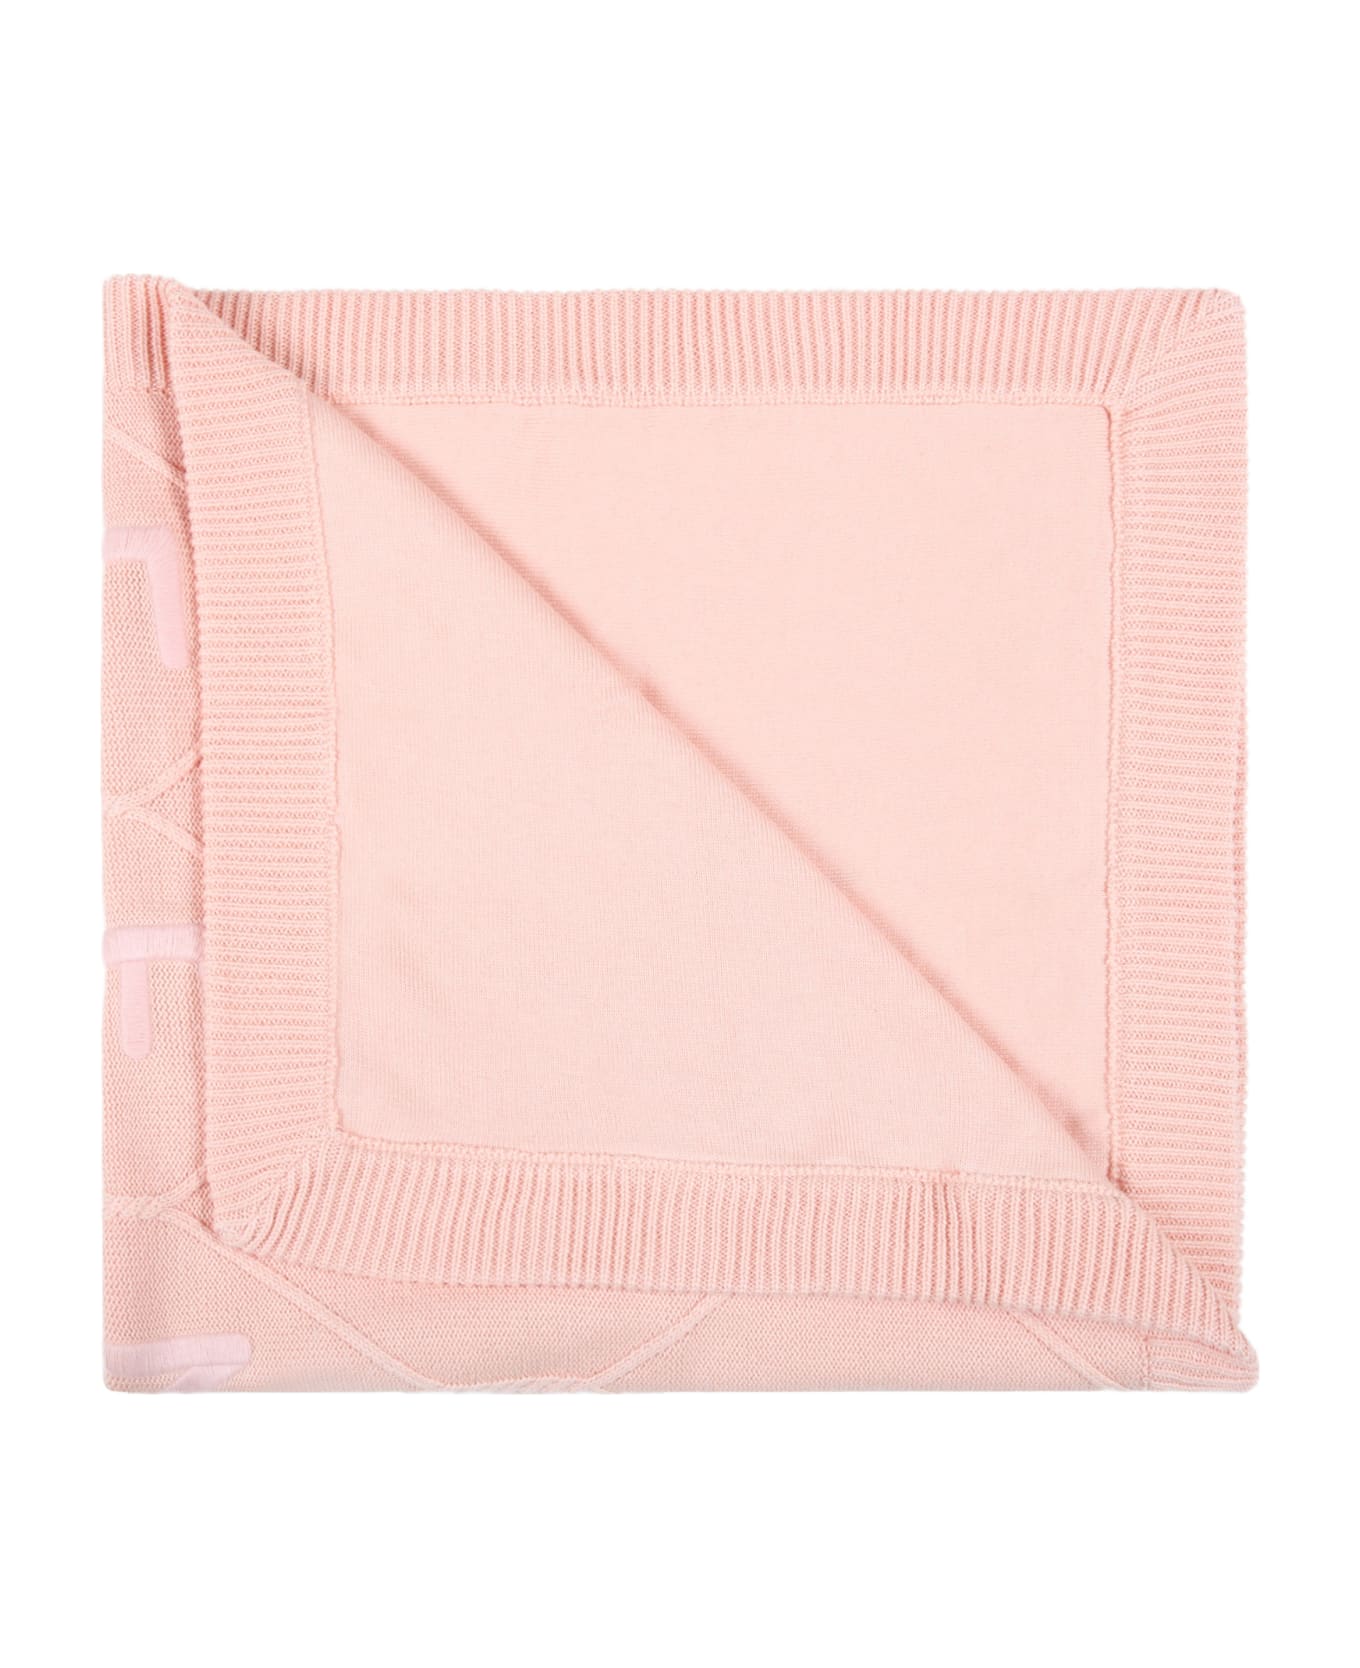 Fendi Pink Blanket For Baby Girl With Logo - Pink アクセサリー＆ギフト